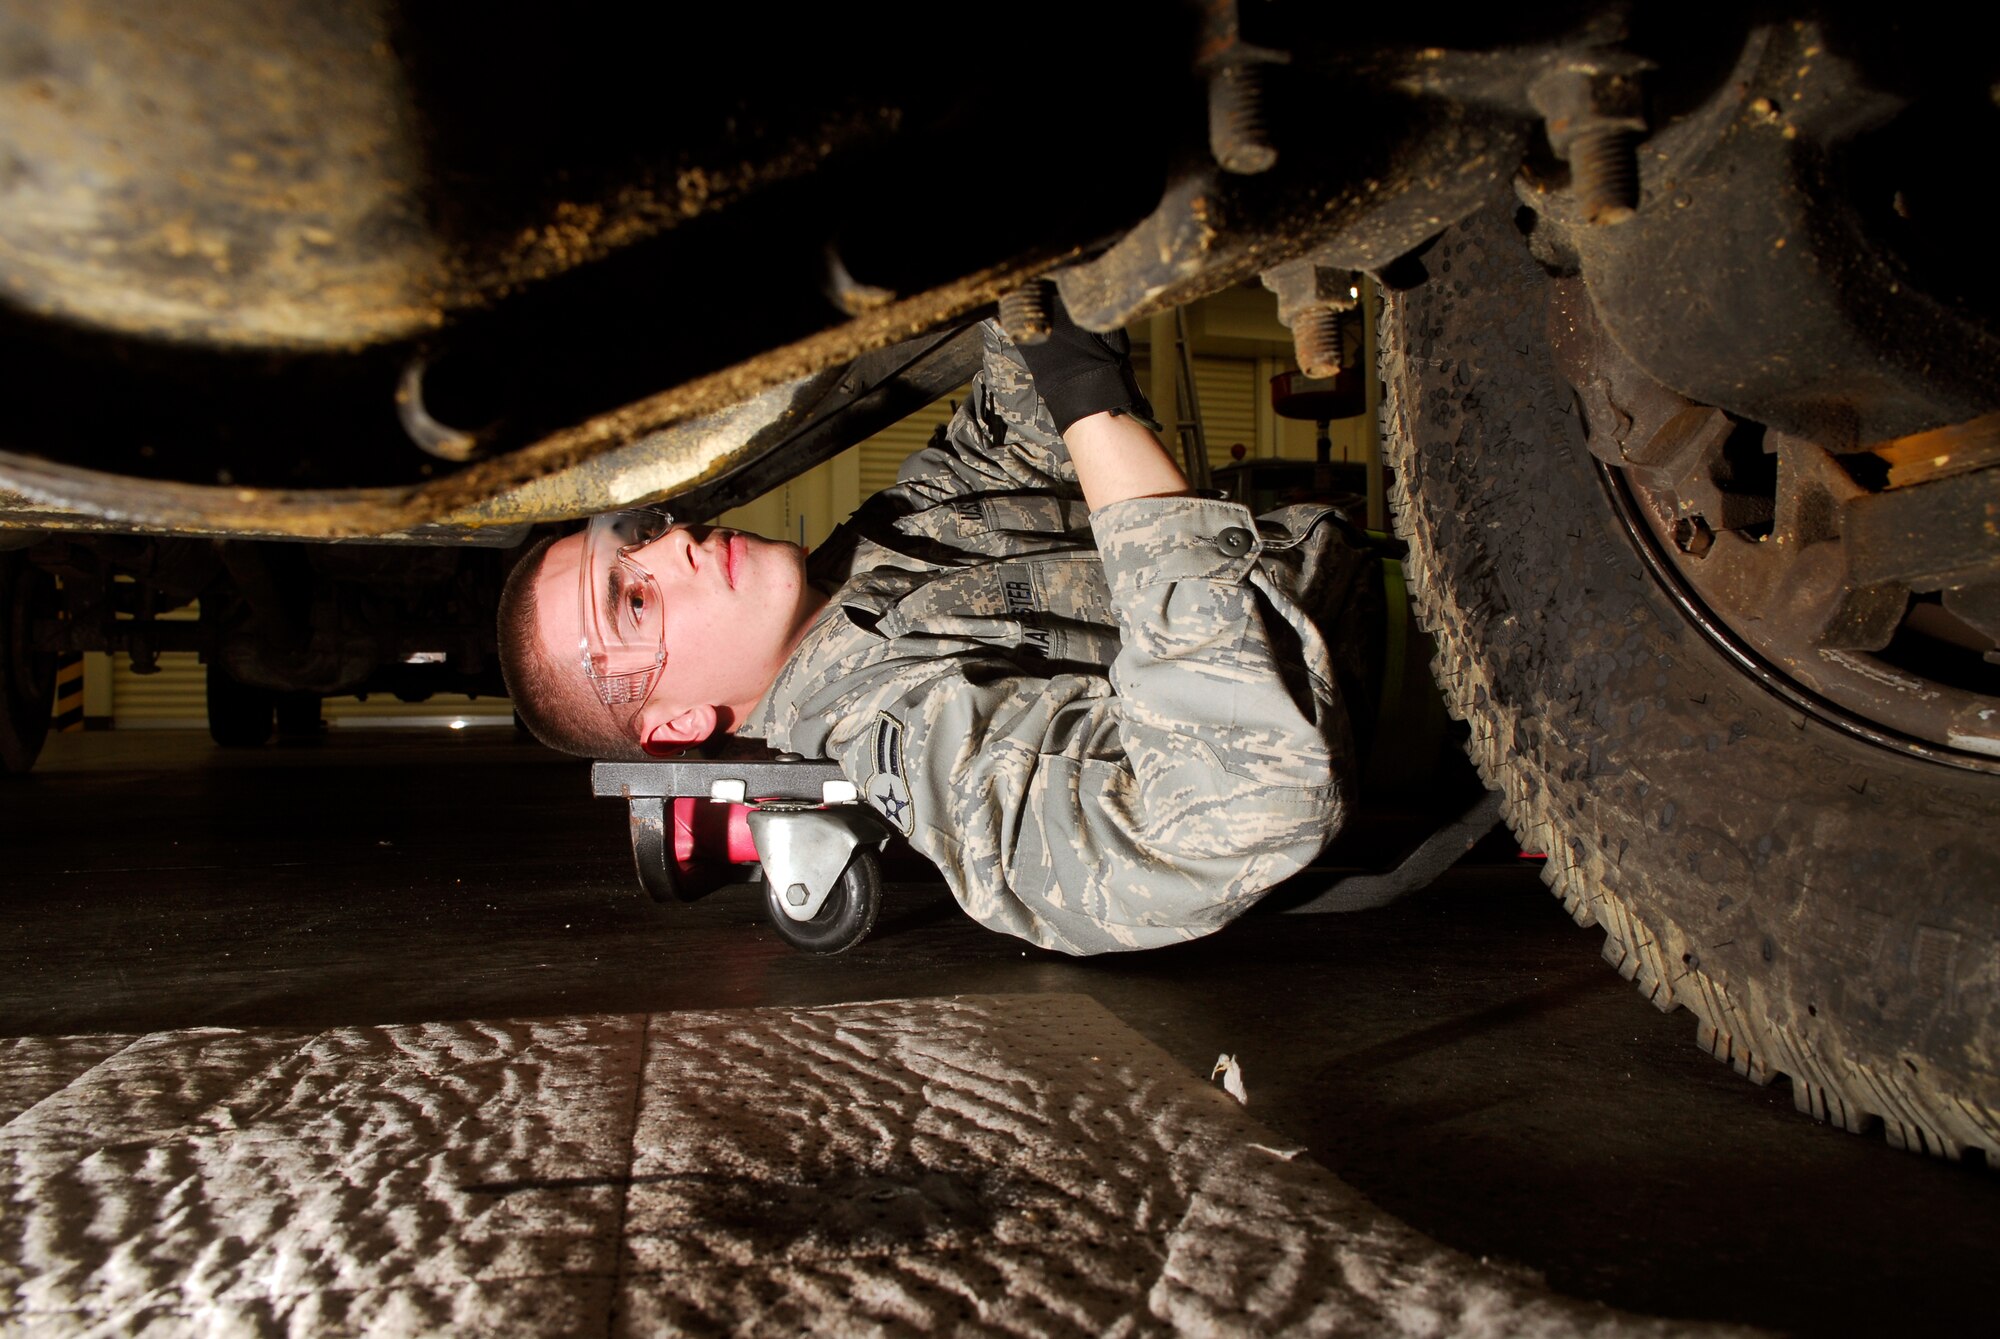 Airman 1st Class Derek Manchester, 18th Logistics Readiness Squadron, inspects the undercarriage of an F-350 truck, prior to replacing a brake line during the 2008 Pacific Air Forces Operational Readiness Inspection at Kadena Air Base, Japan, March 11, 2008. PACAF is conducting the inspection from March 9 to 15 to validate the mission readiness of the 18th Wing. (U.S. Air Force photo/Staff Sgt. Joshua J. Garcia) (Released)